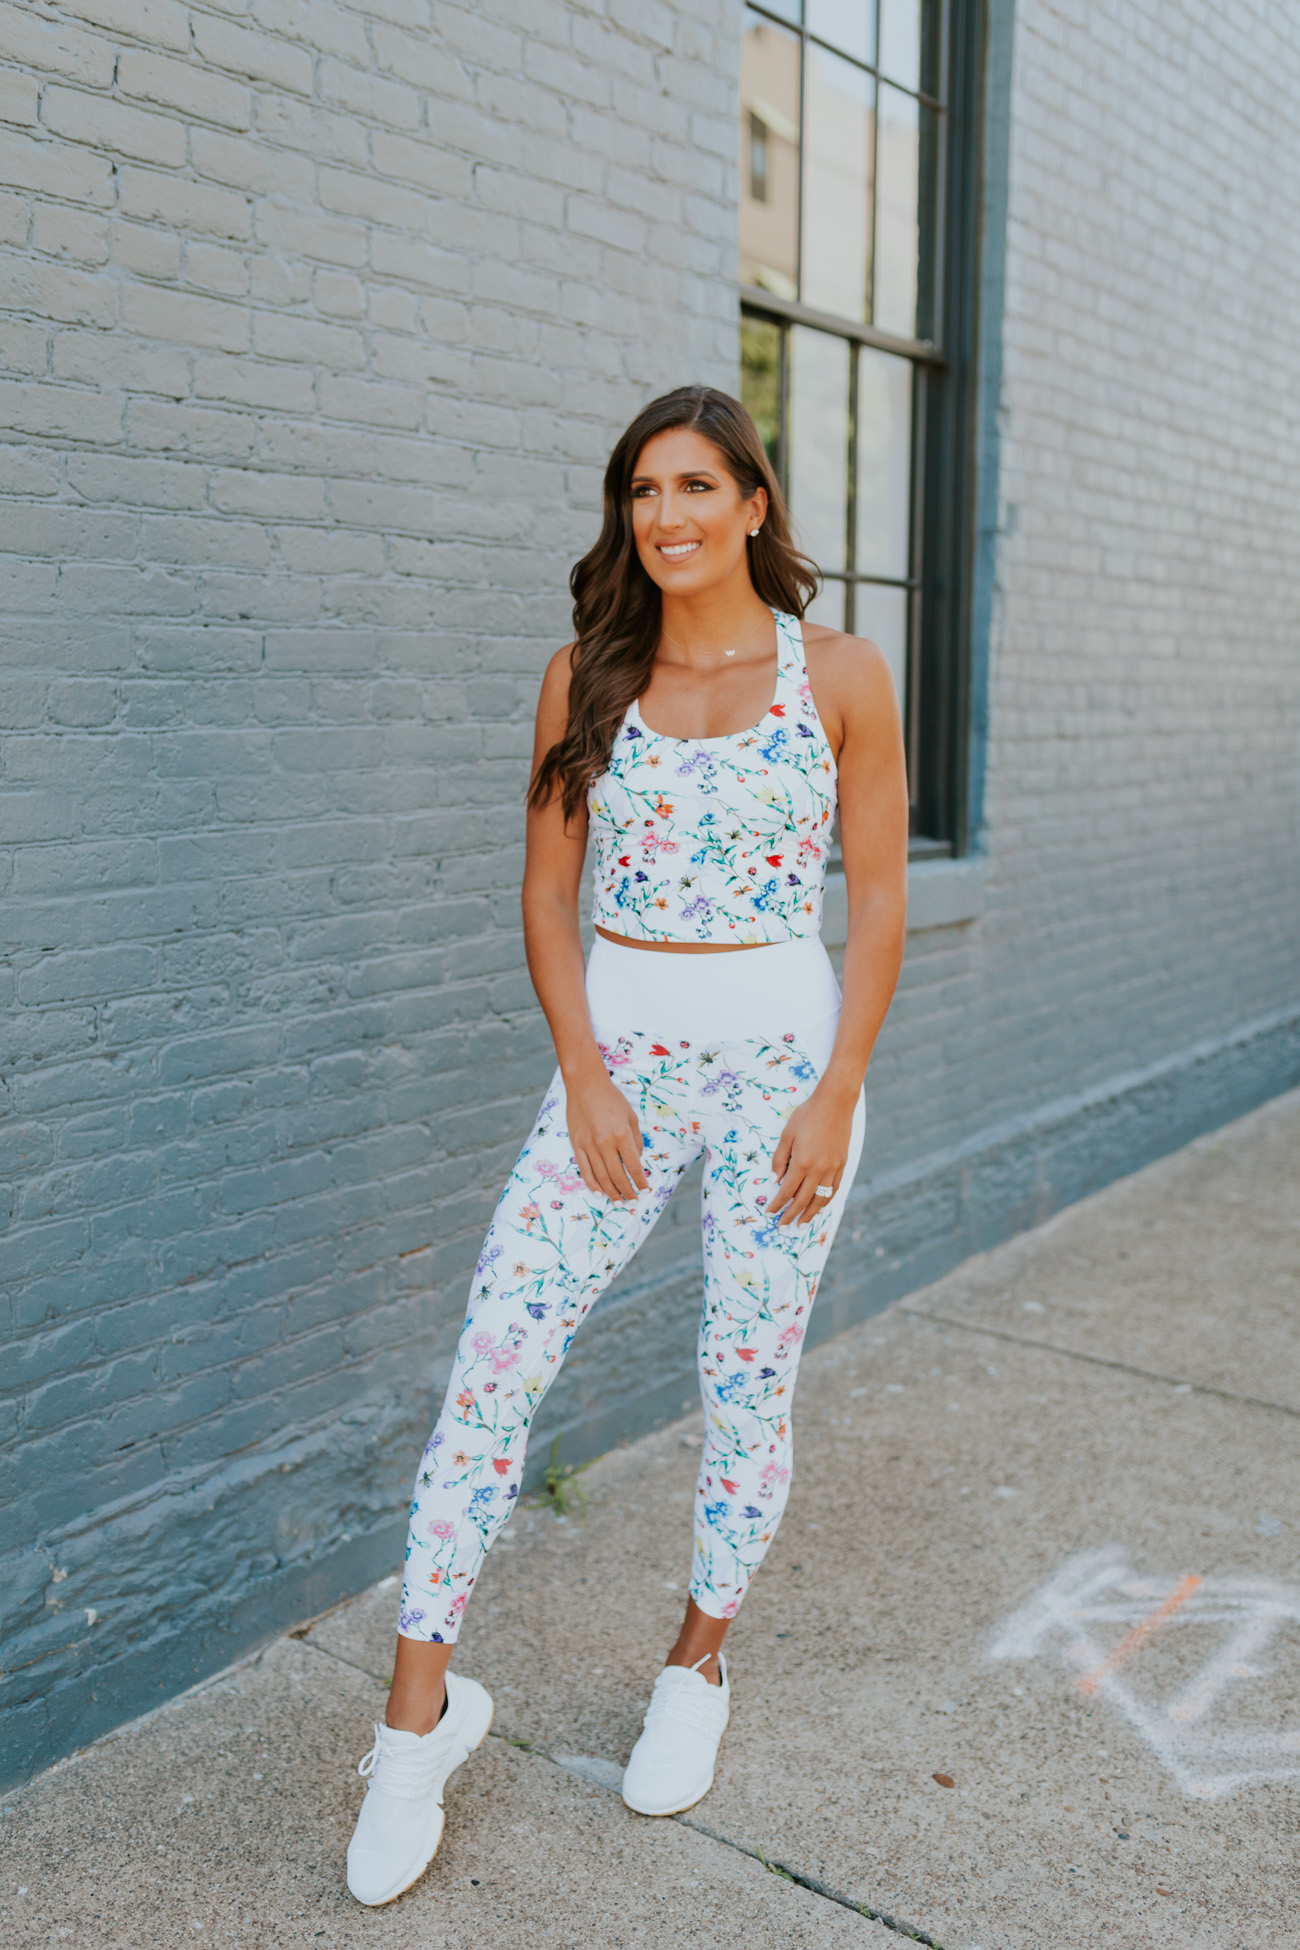 betsey johnson activewear, floral activewear, fitwithasd, a southern drawl fitness, cute activewear, cute athleisure, workout outfit, workout style, cute leggings, floral leggings, activewear set // grace white a southern drawl